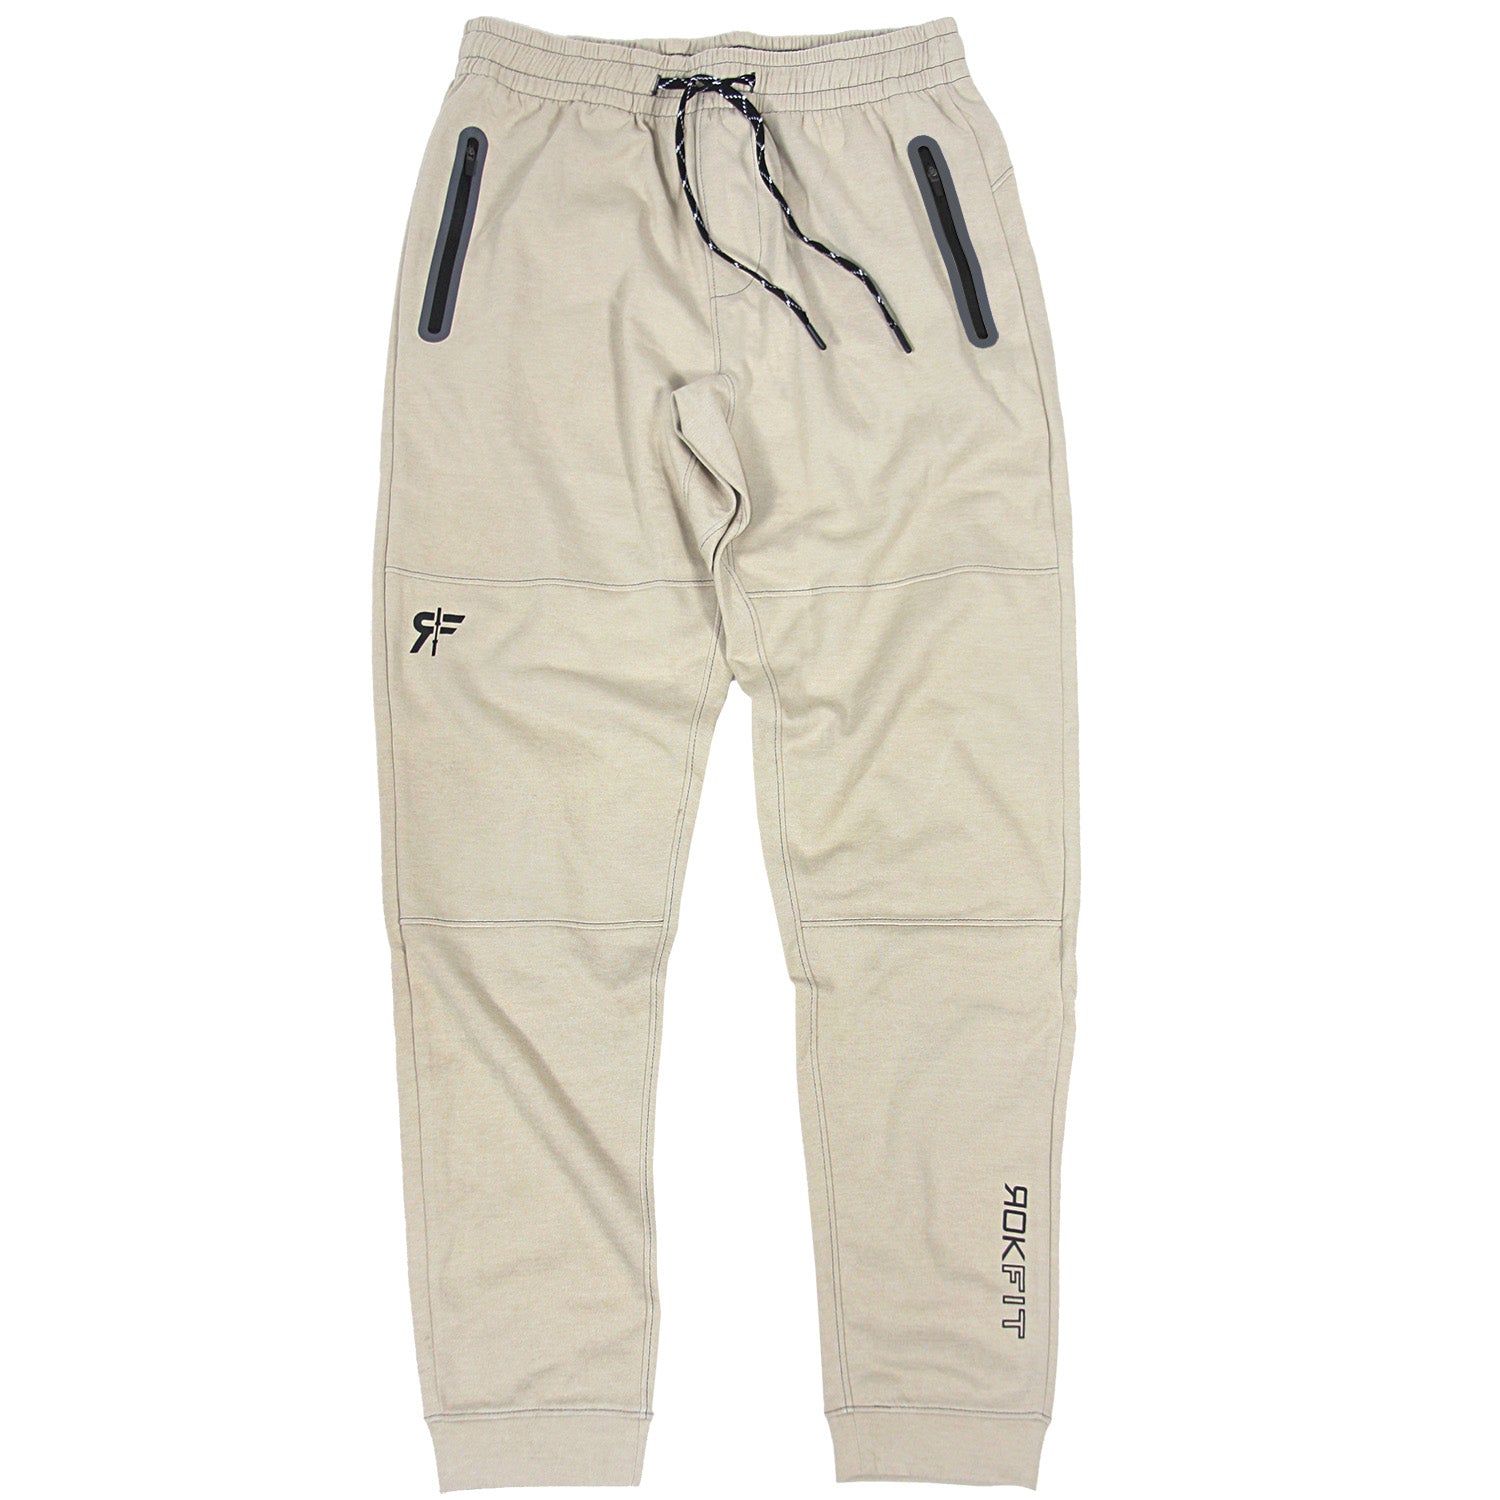 MOTION' Joggers - by RokFit